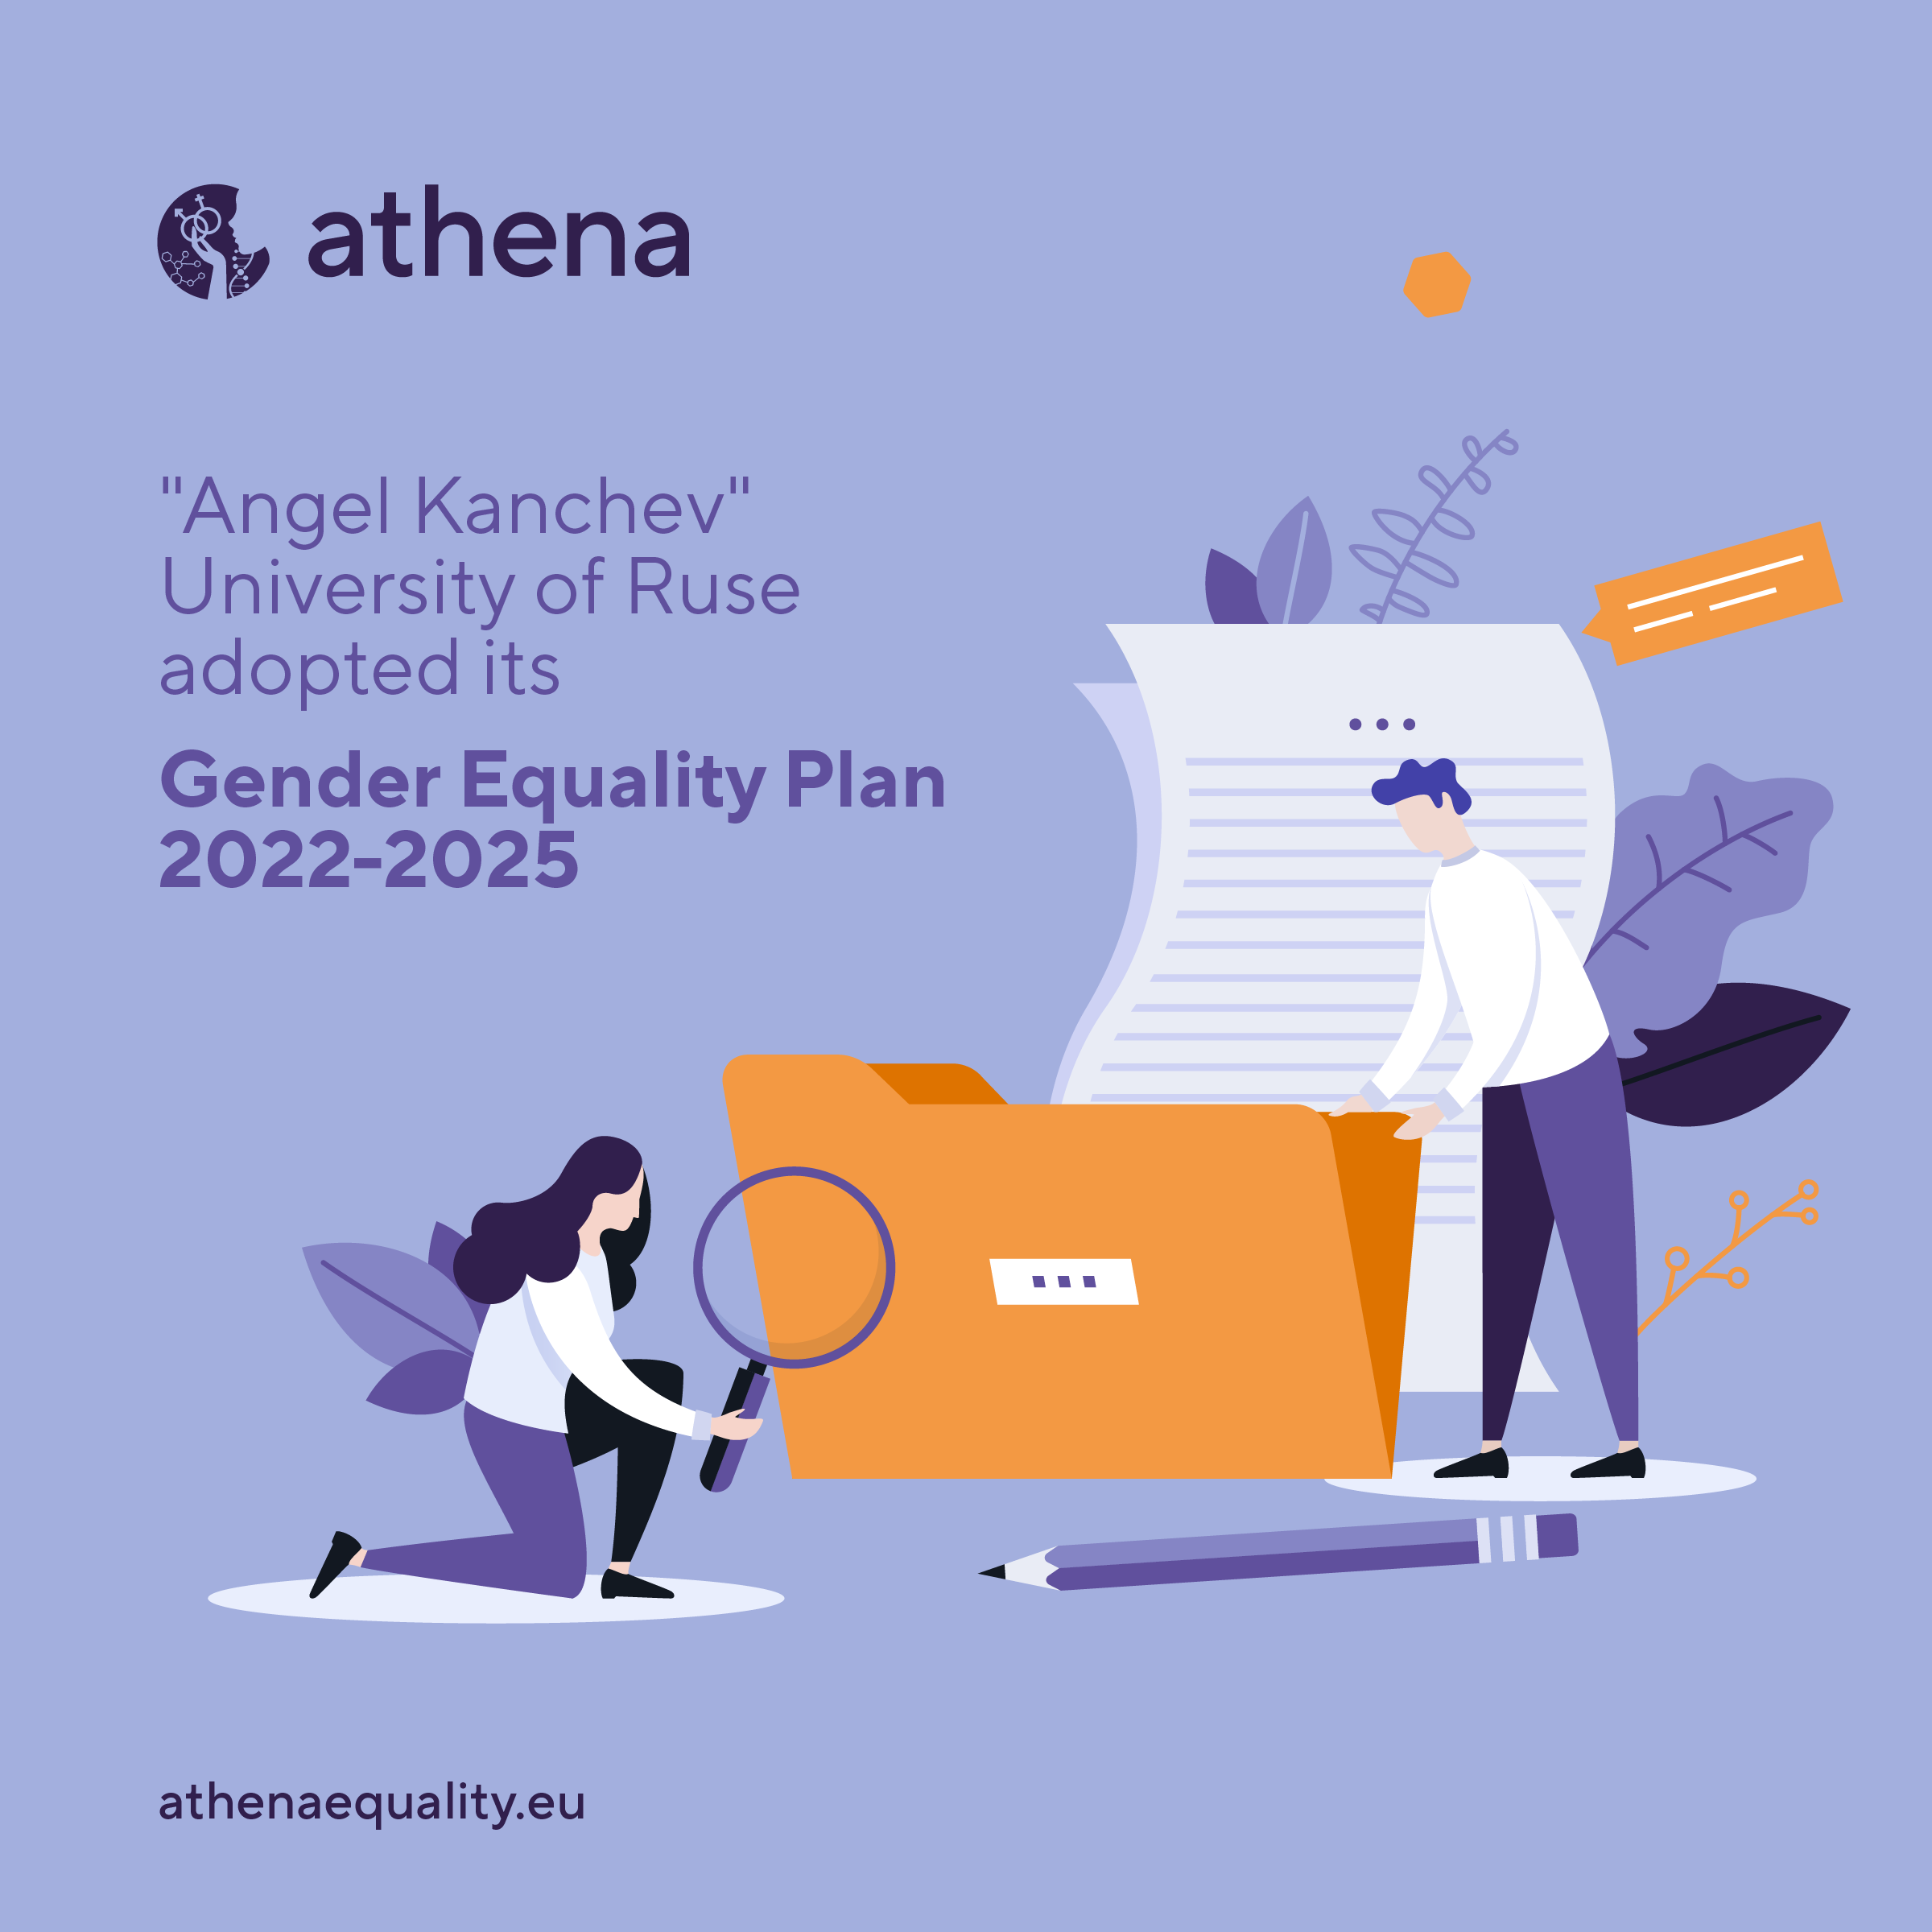 “Angel Kanchev” University of Ruse adopted its Gender Equality Plan